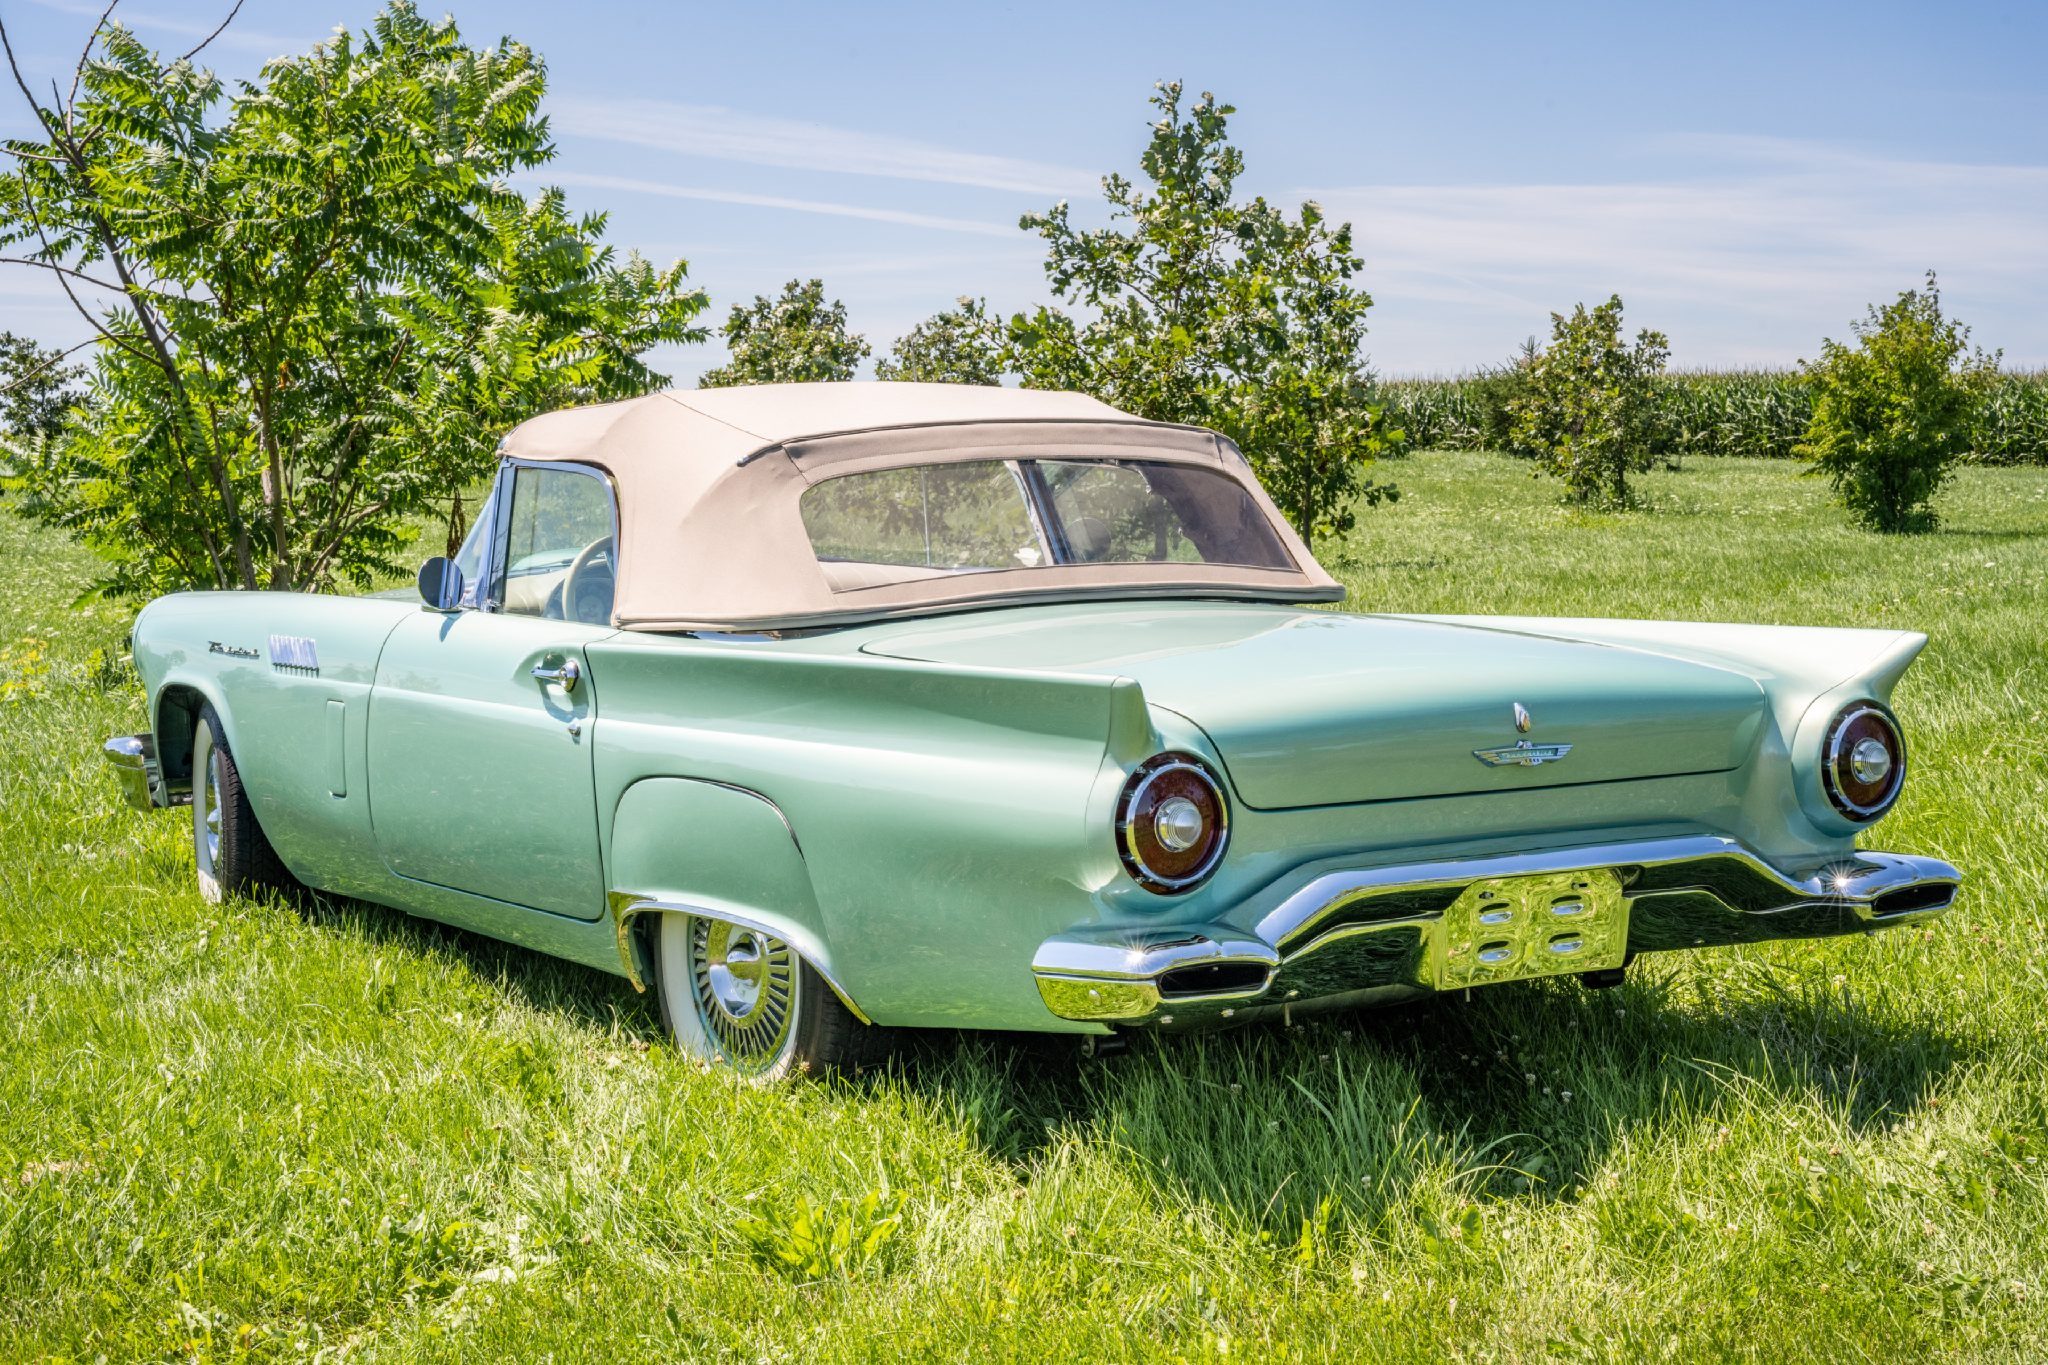 1957 Ford Thunderbird in a field